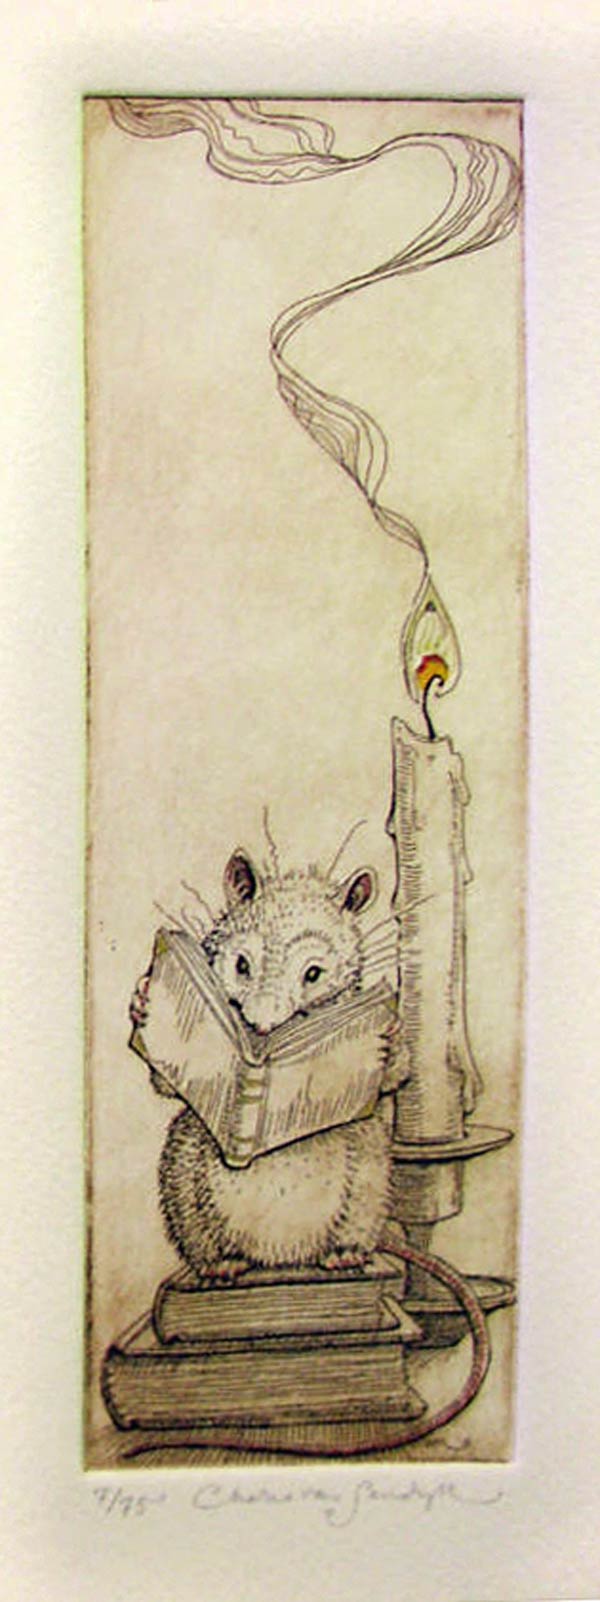 Literary Mouse [reading mouse with books and candle], etching with gilt (Charles van Sandwyk, 2011)